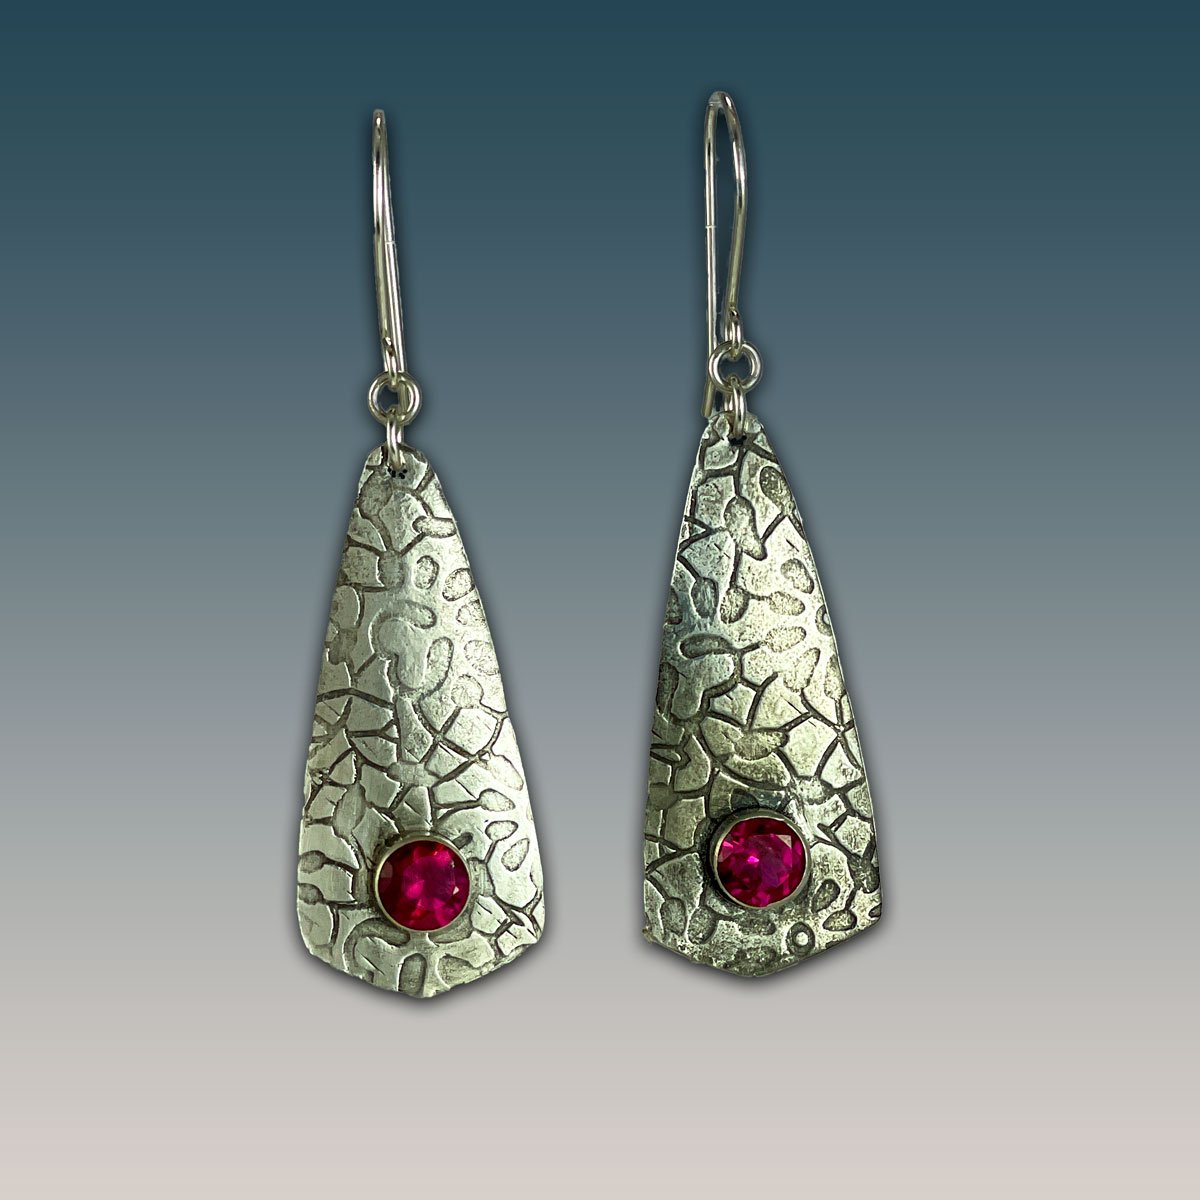 Textured Sterling Silver Spear Drop Earrings with faceted Ruby